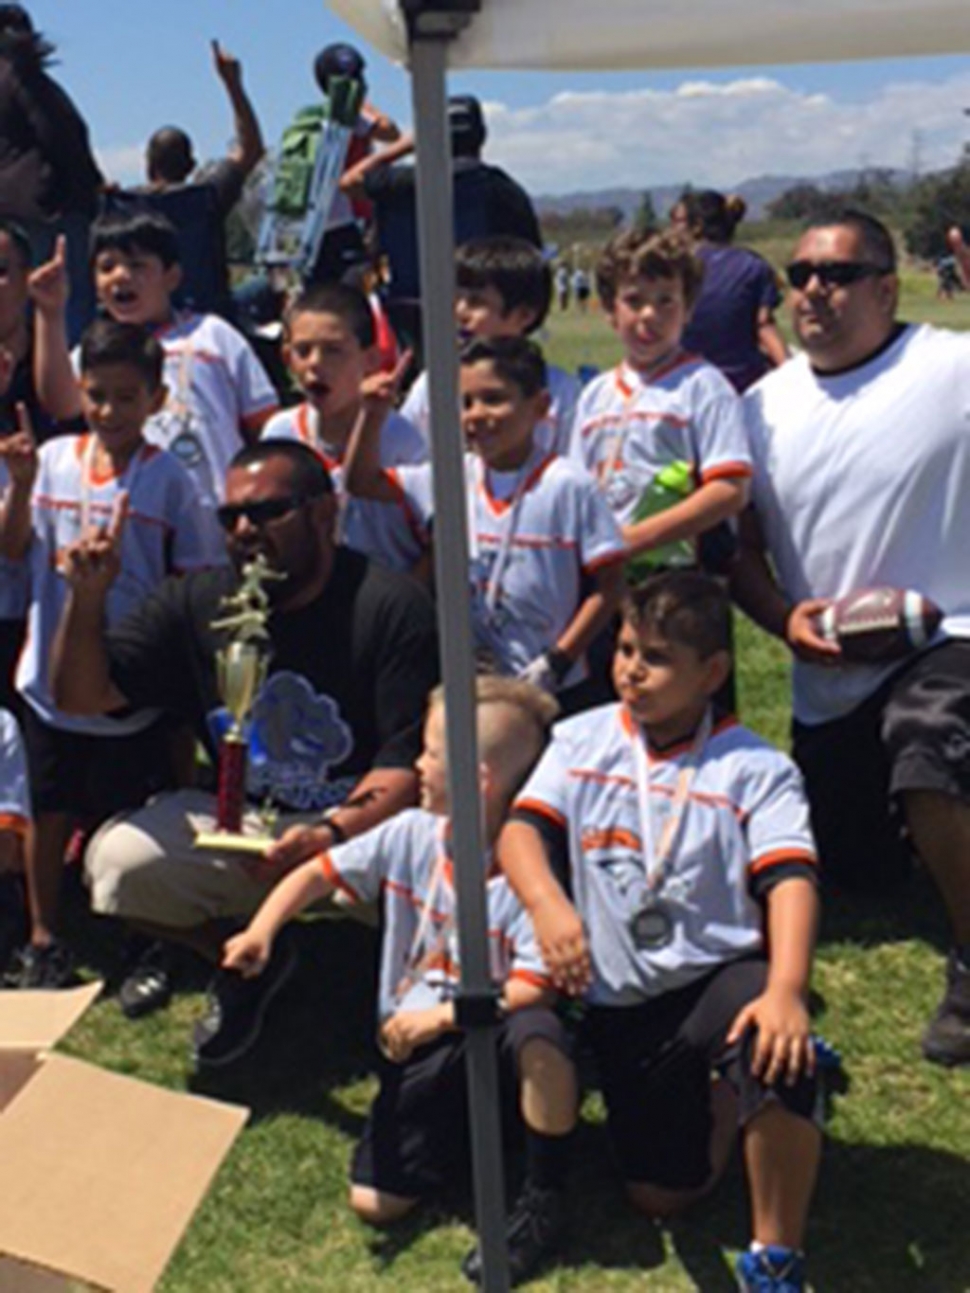 The Fillmore Broncos Flag Football team with their coach and trophy after winning division championship against Ventura last Sunday.